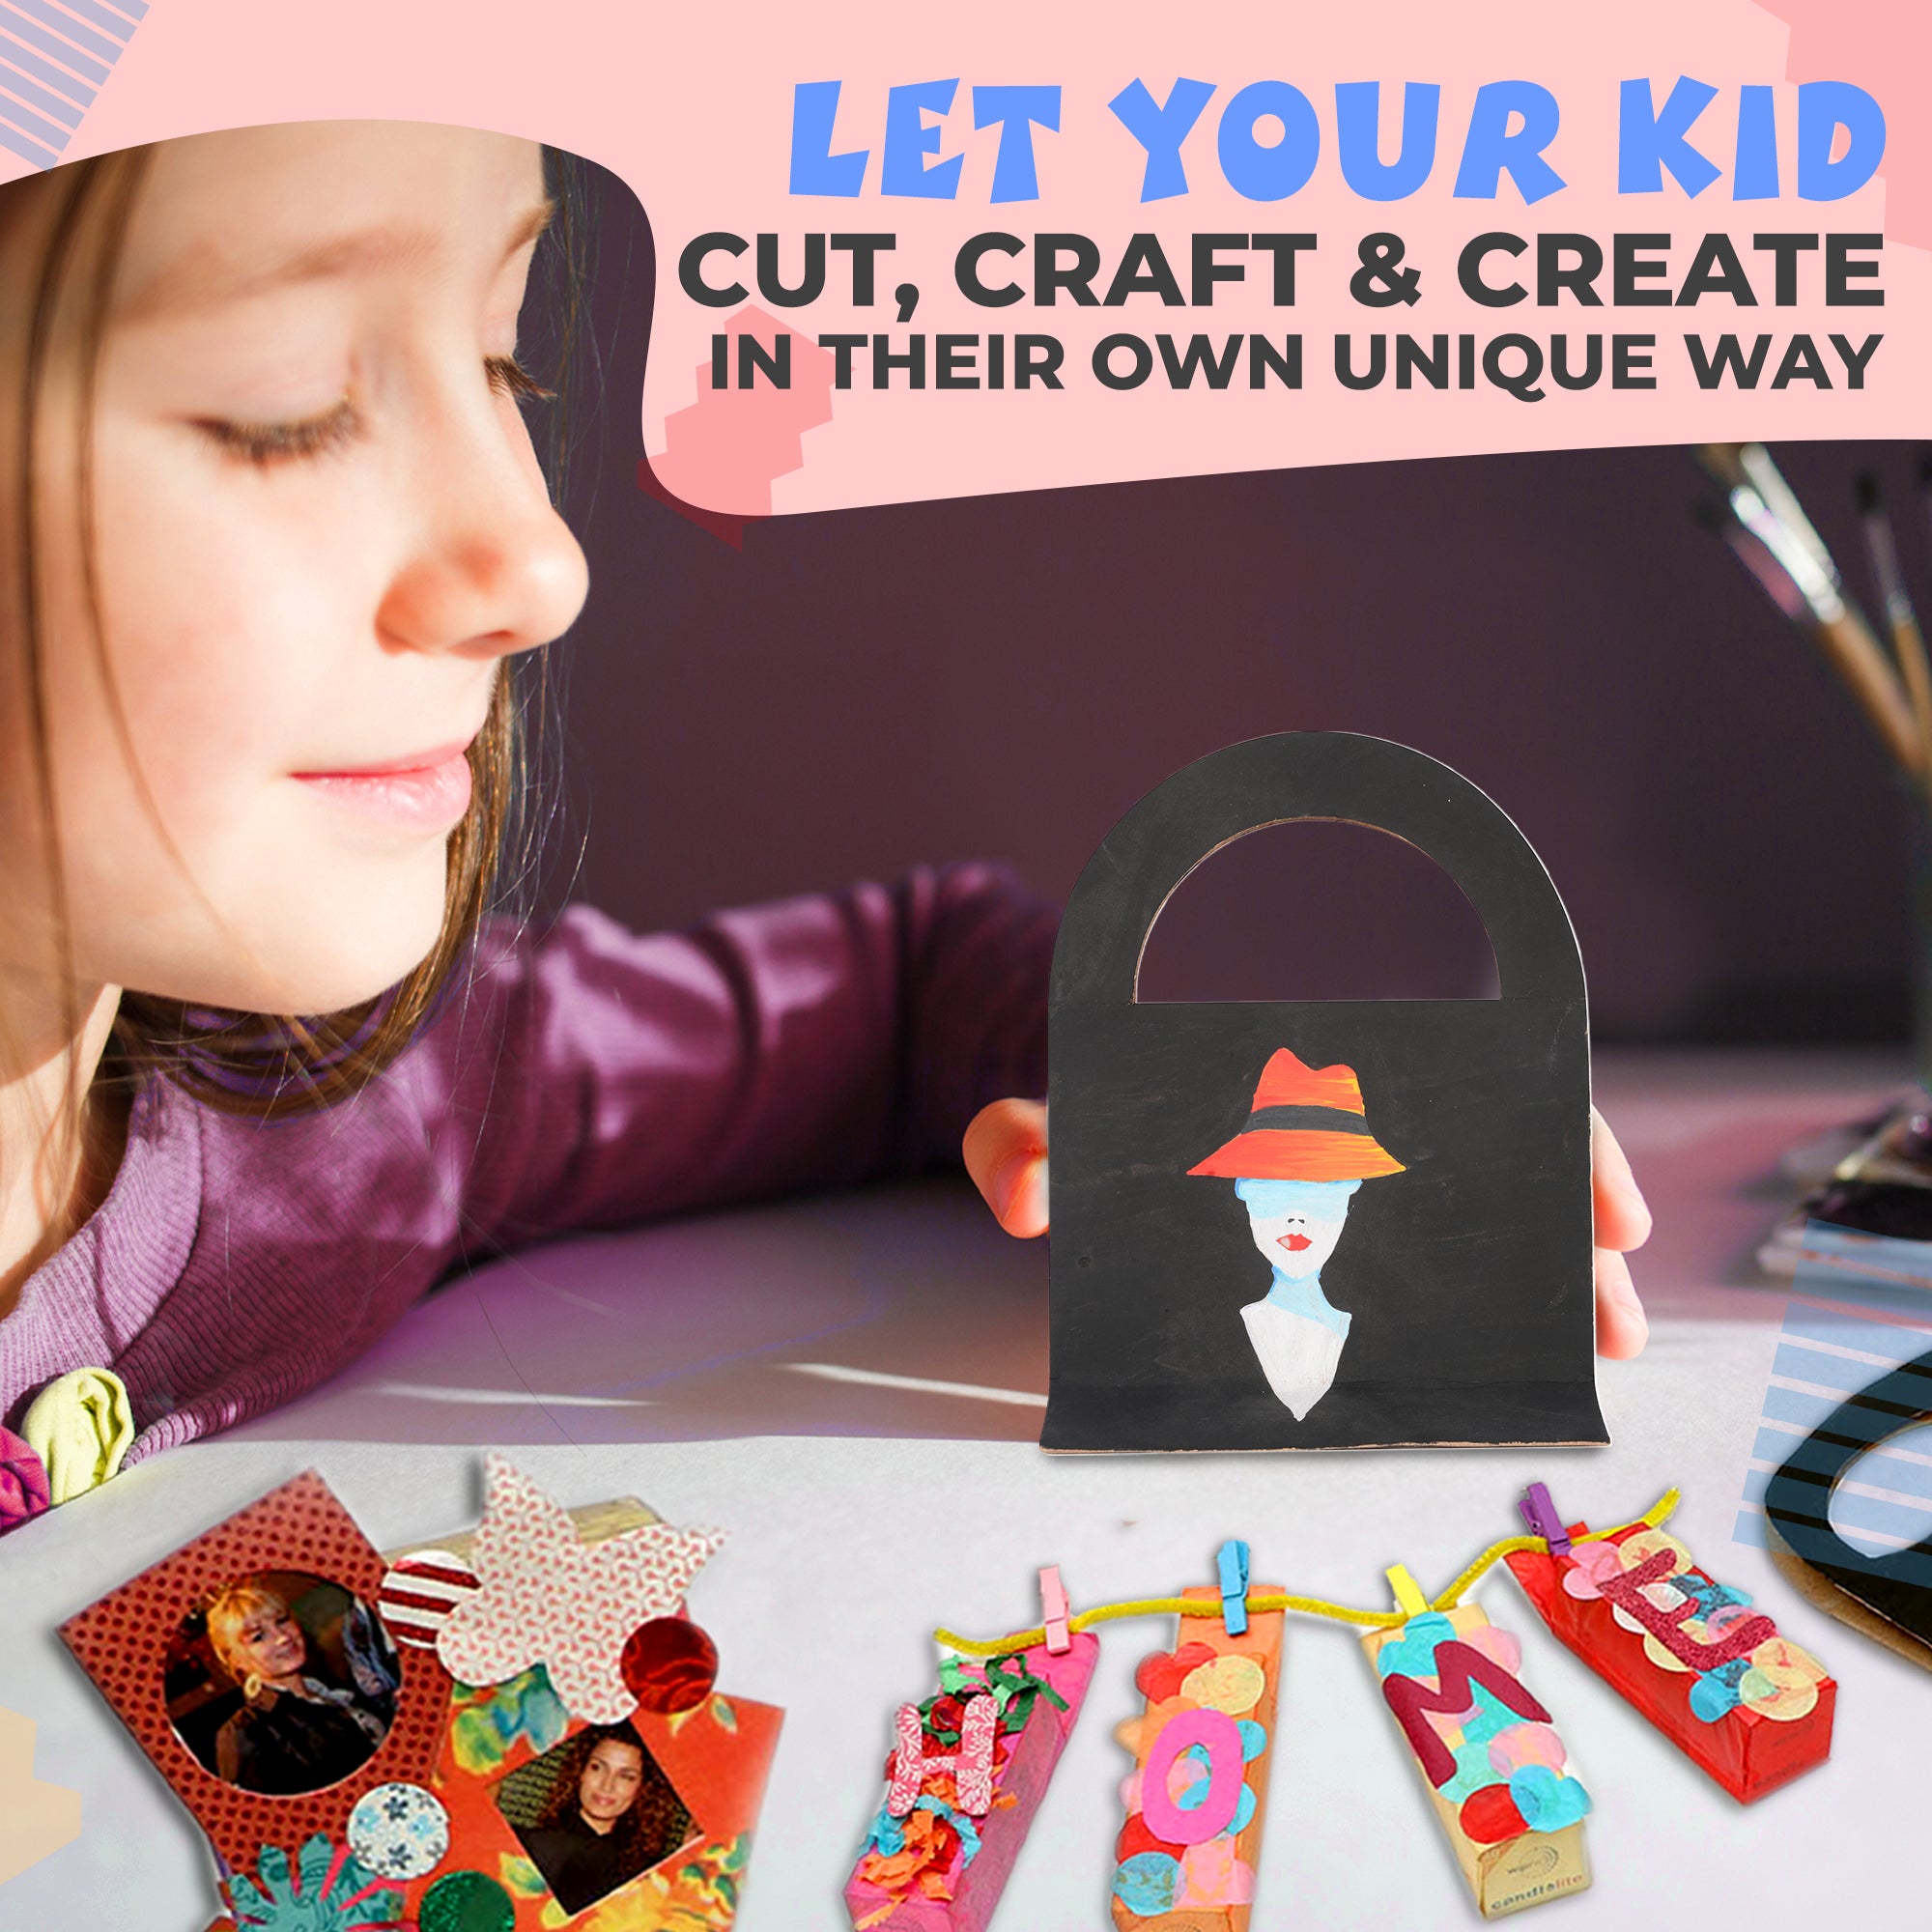 10+ Fun and Quirky Crafts for Stones - Fun Crafts Kids